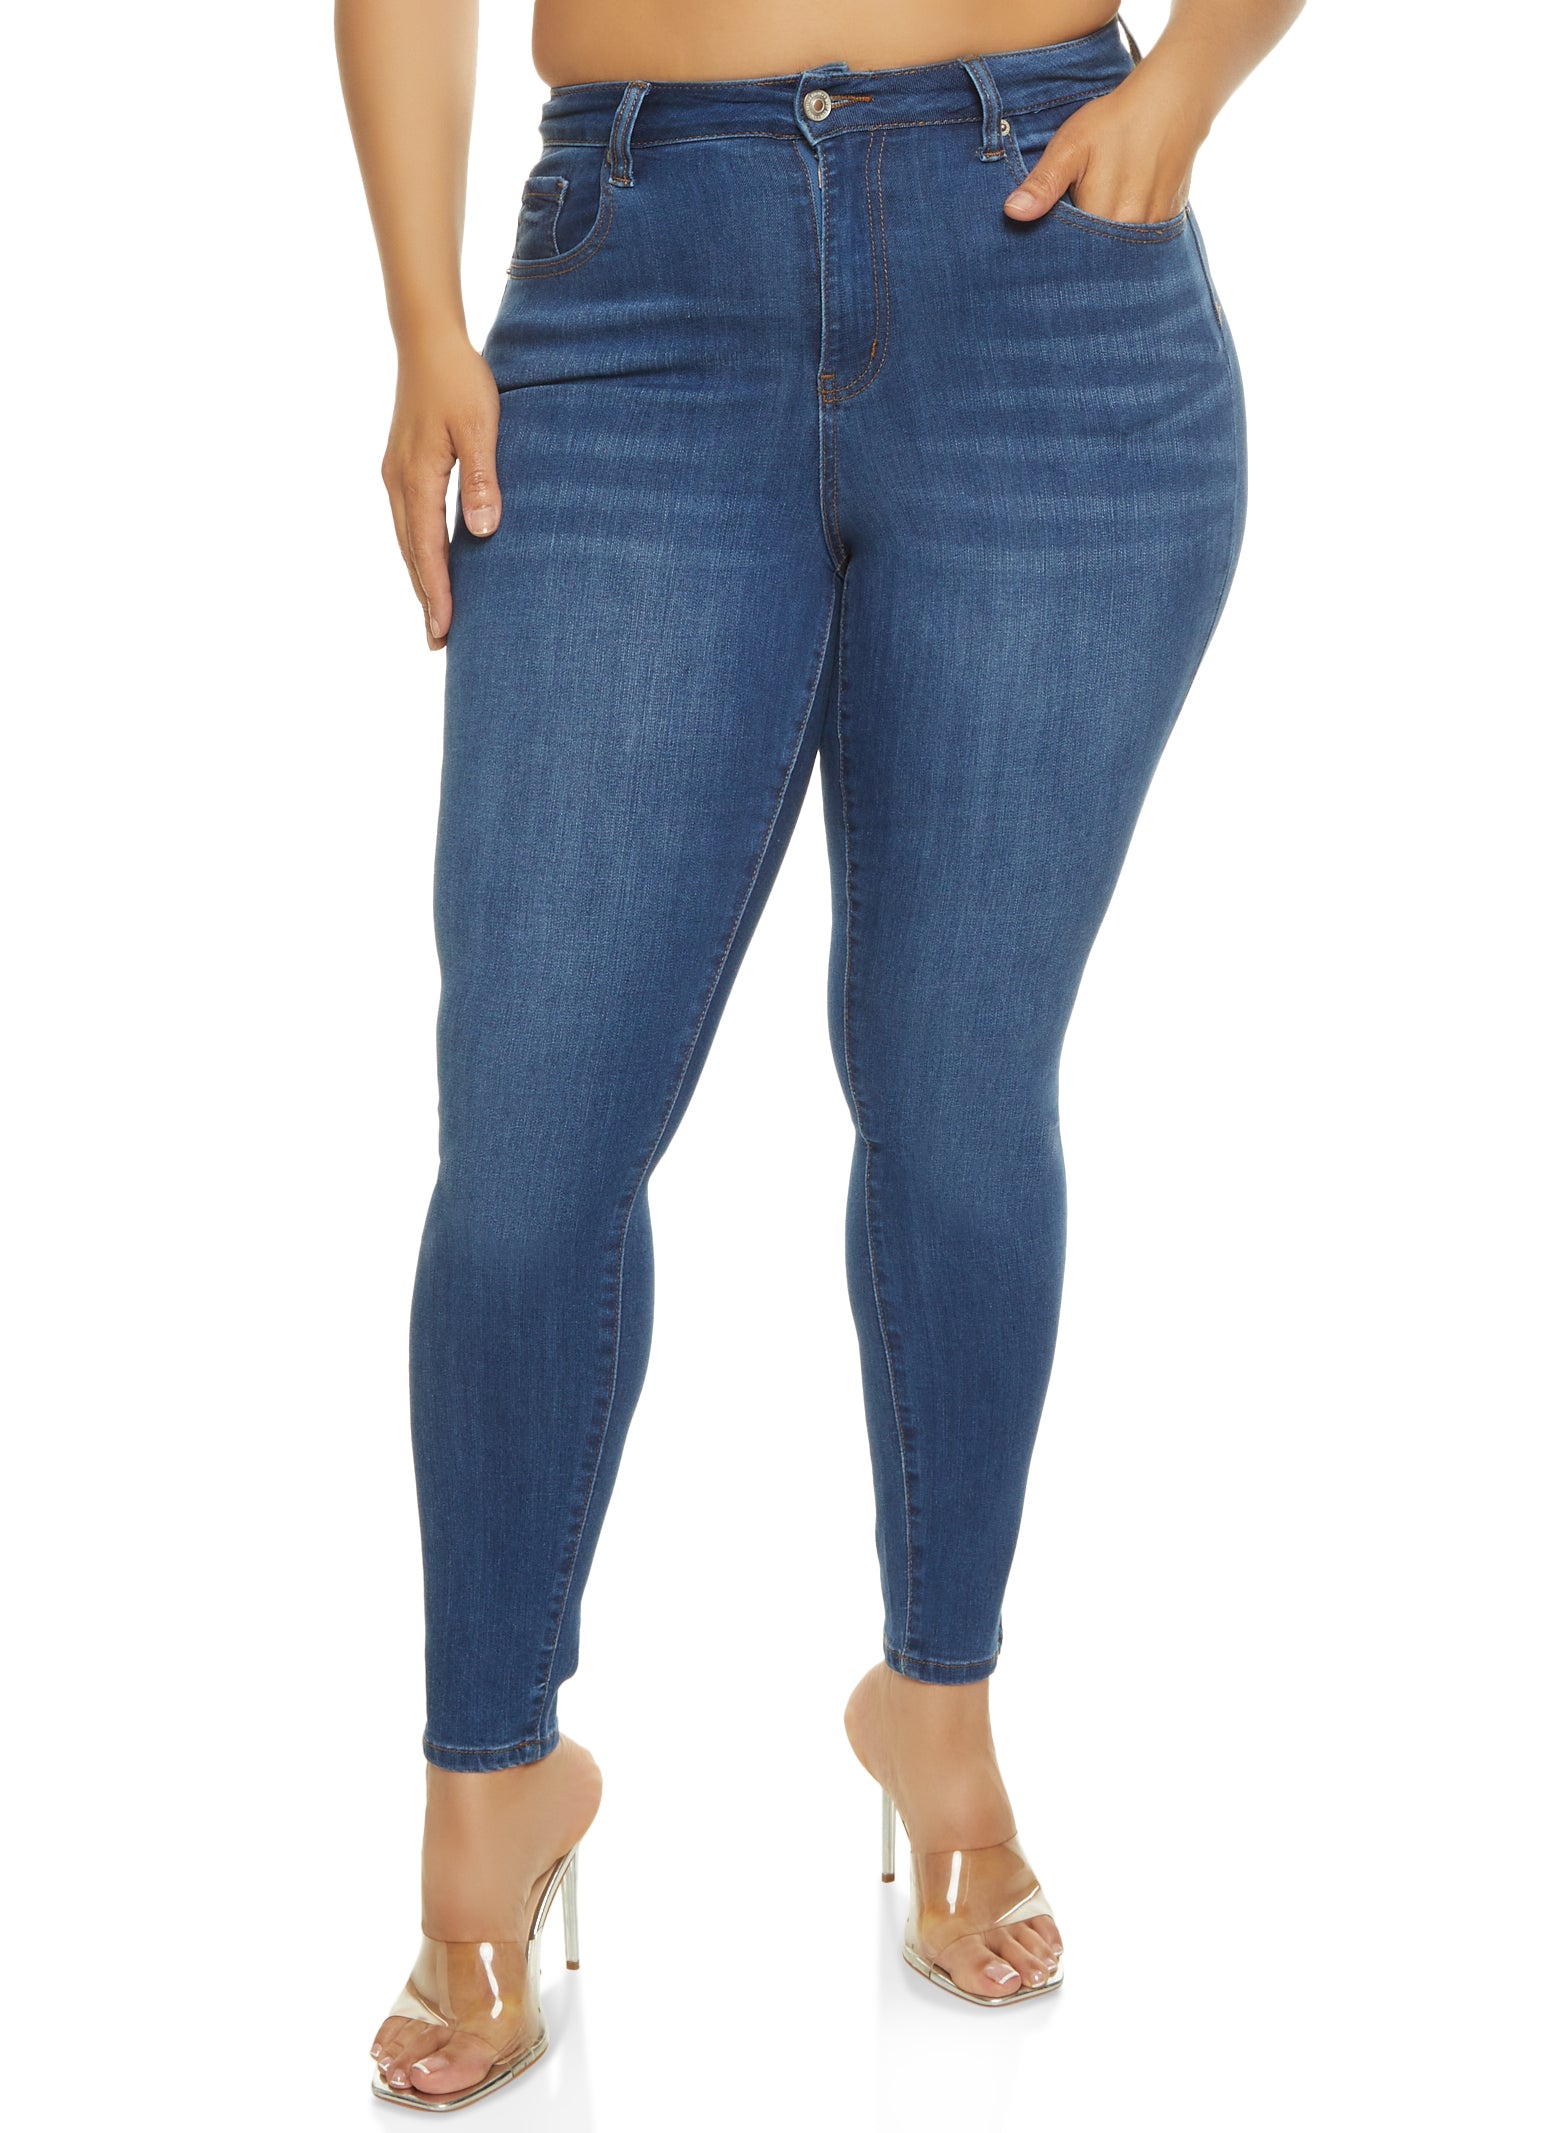 Womens Plus Size WAX Basic High Rise Skinny Jeans, Blue, Size 18